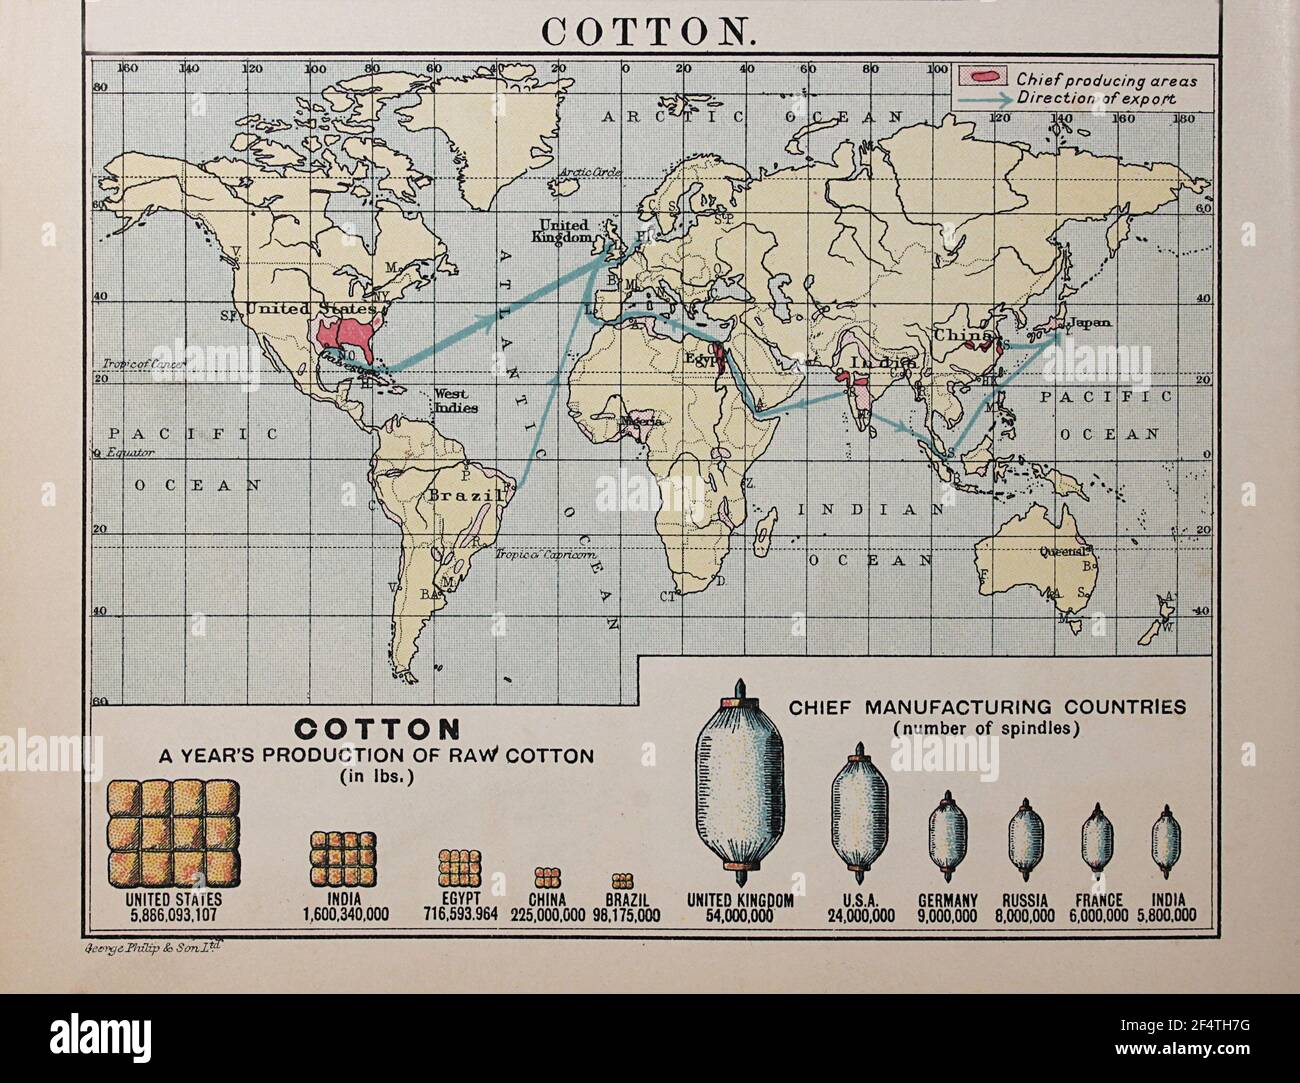 World map from 'Philips' Chamber of Commerce Atlas', 1912, showing cotton production. Stock Photo